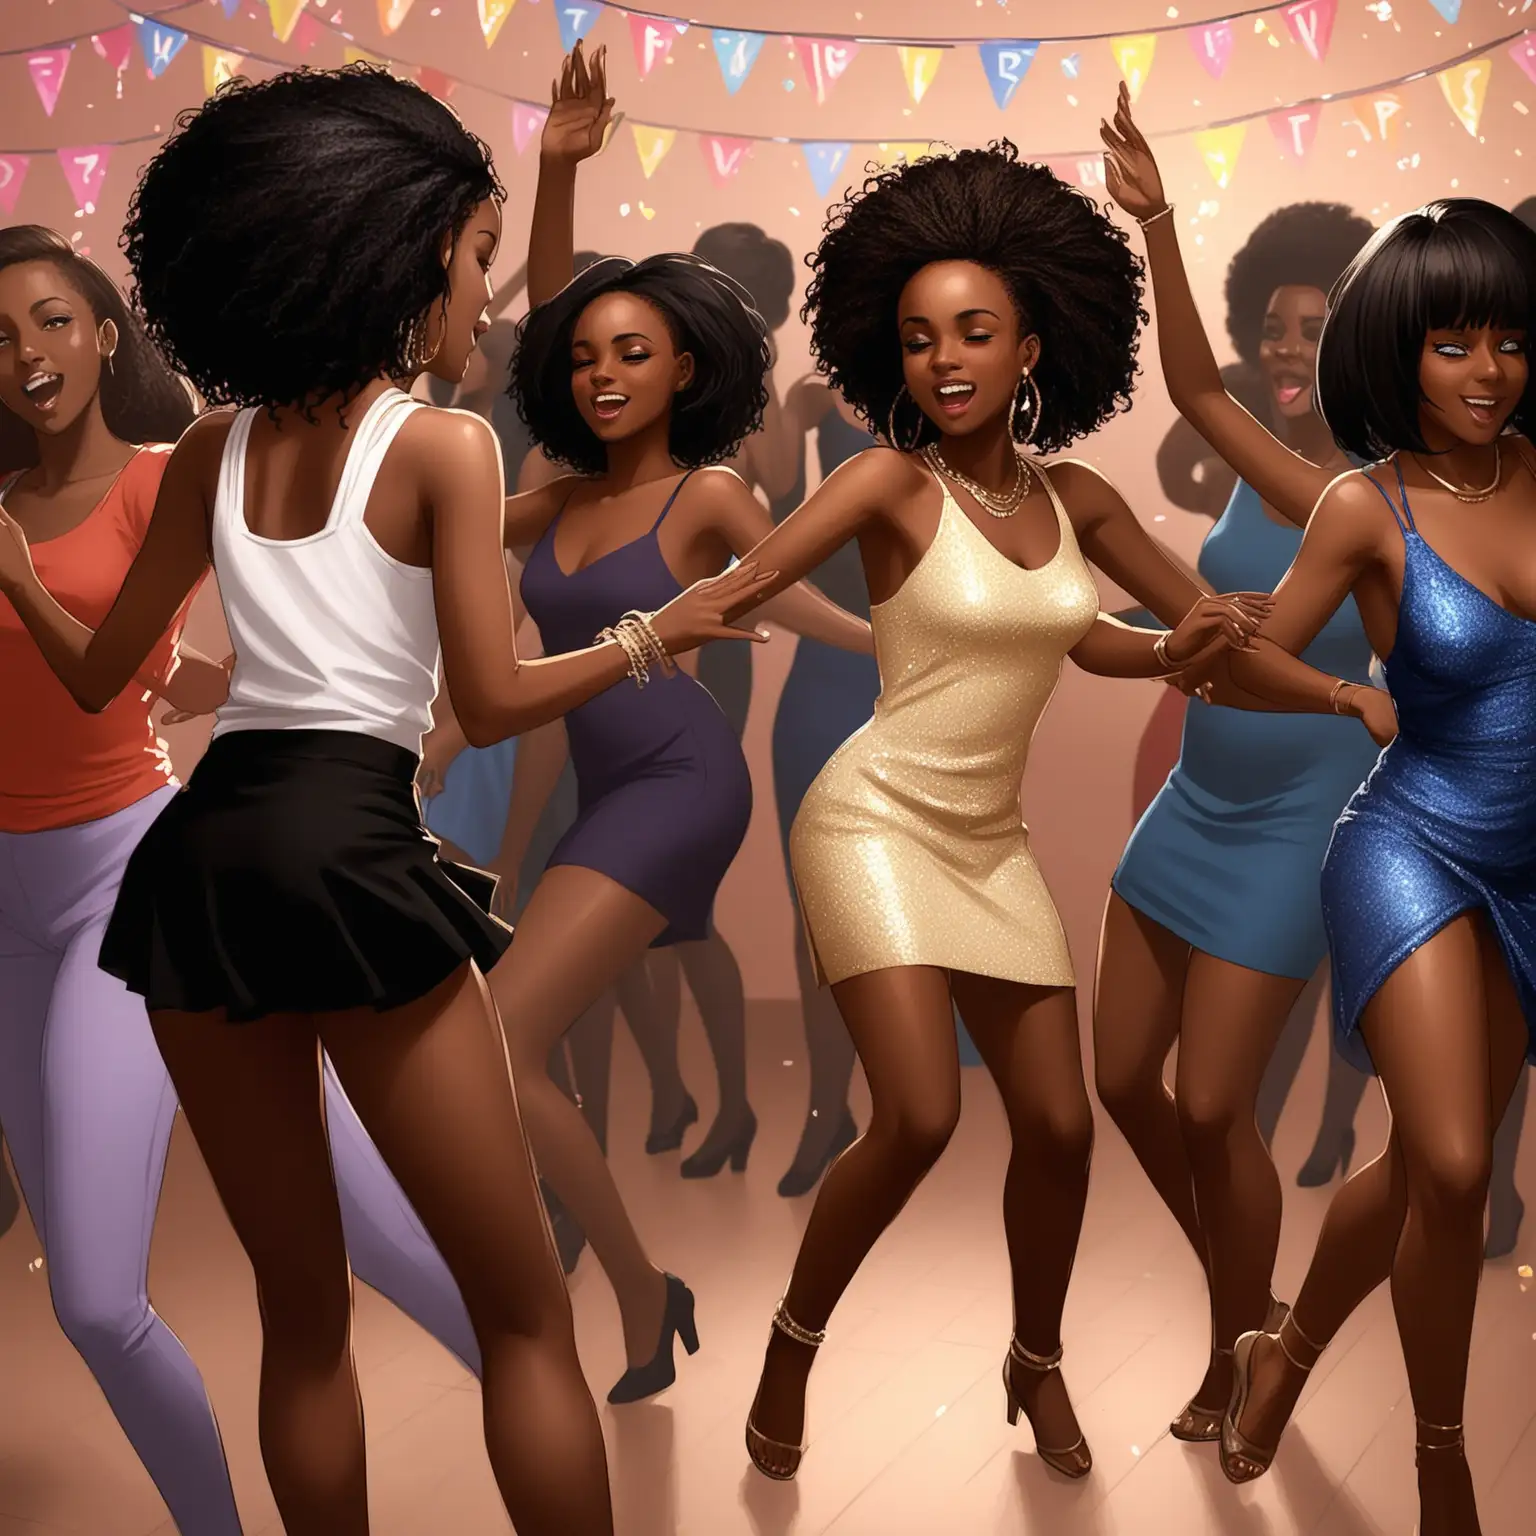 Black Girls Dancing at a Vibrant Party